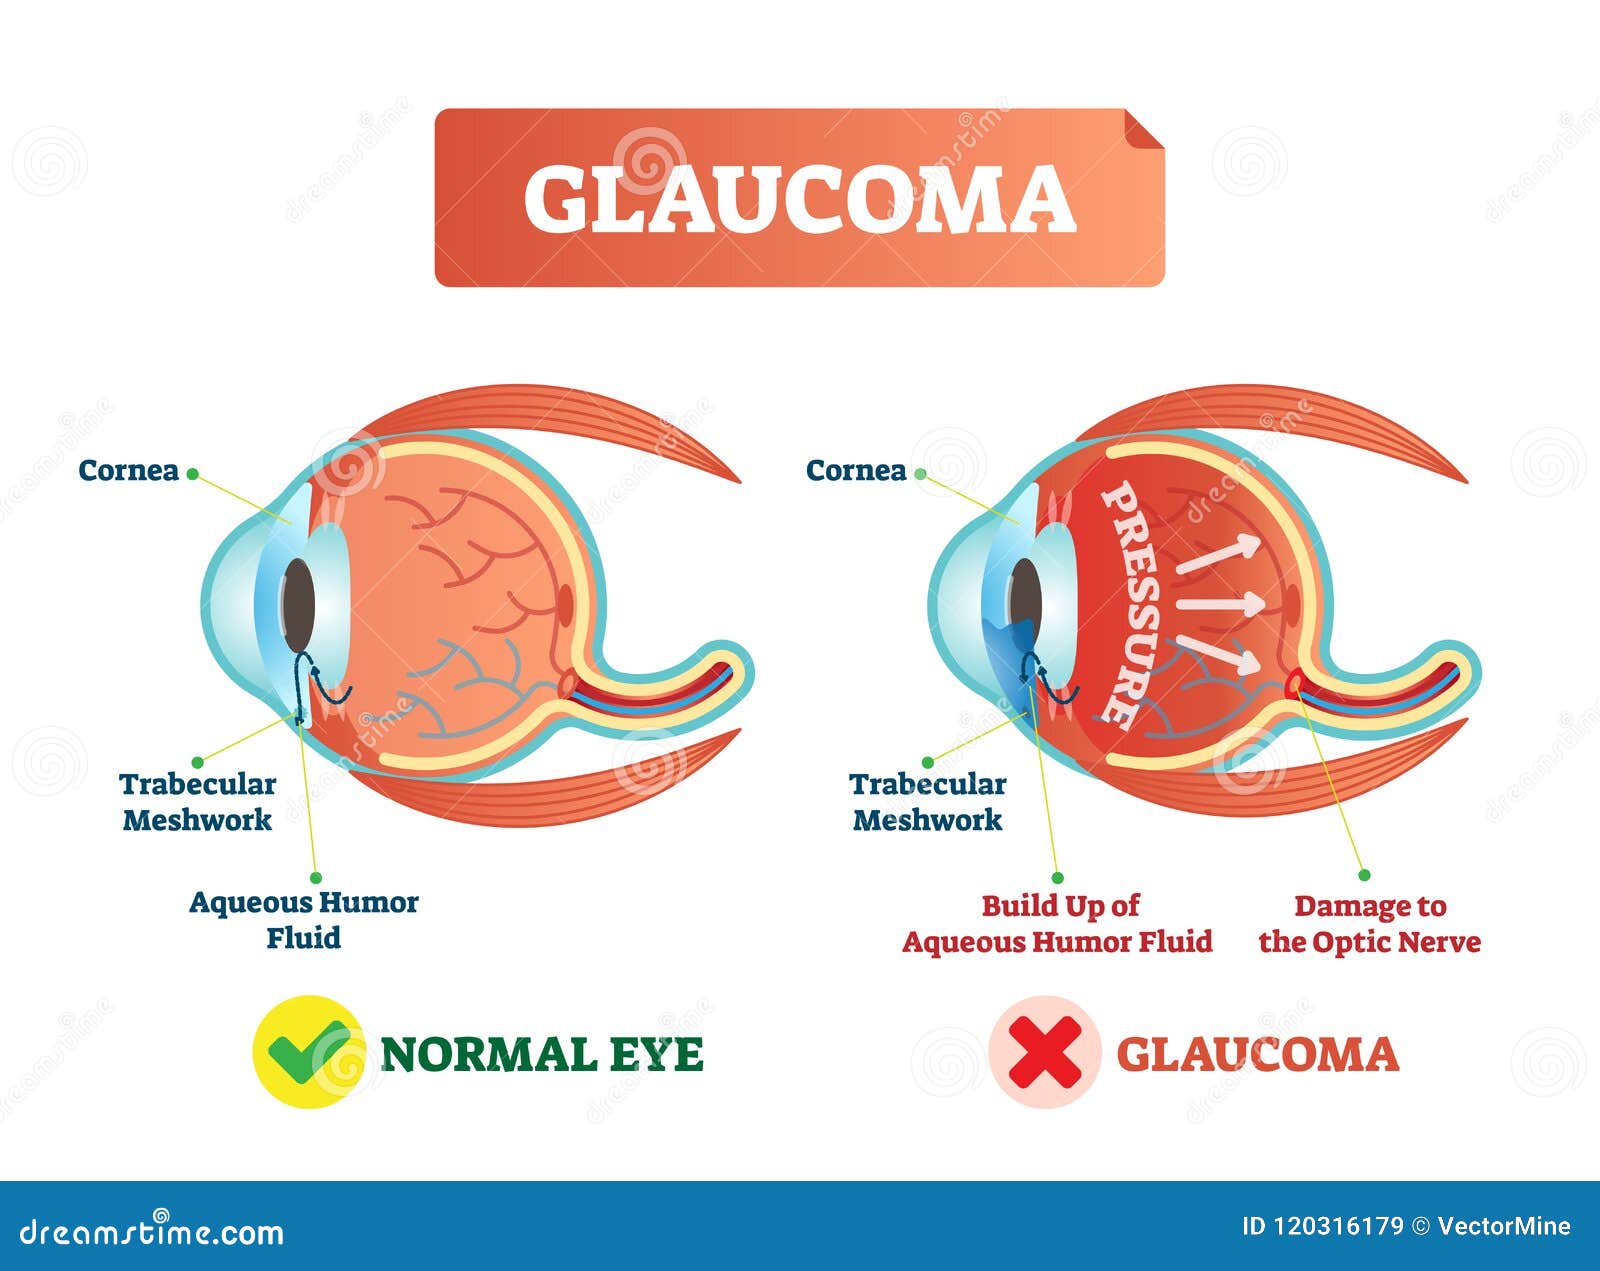   of glaucom. cross section with damaged eye. scheme with cornea, trabecular meshwork and aqueous humor fluid.